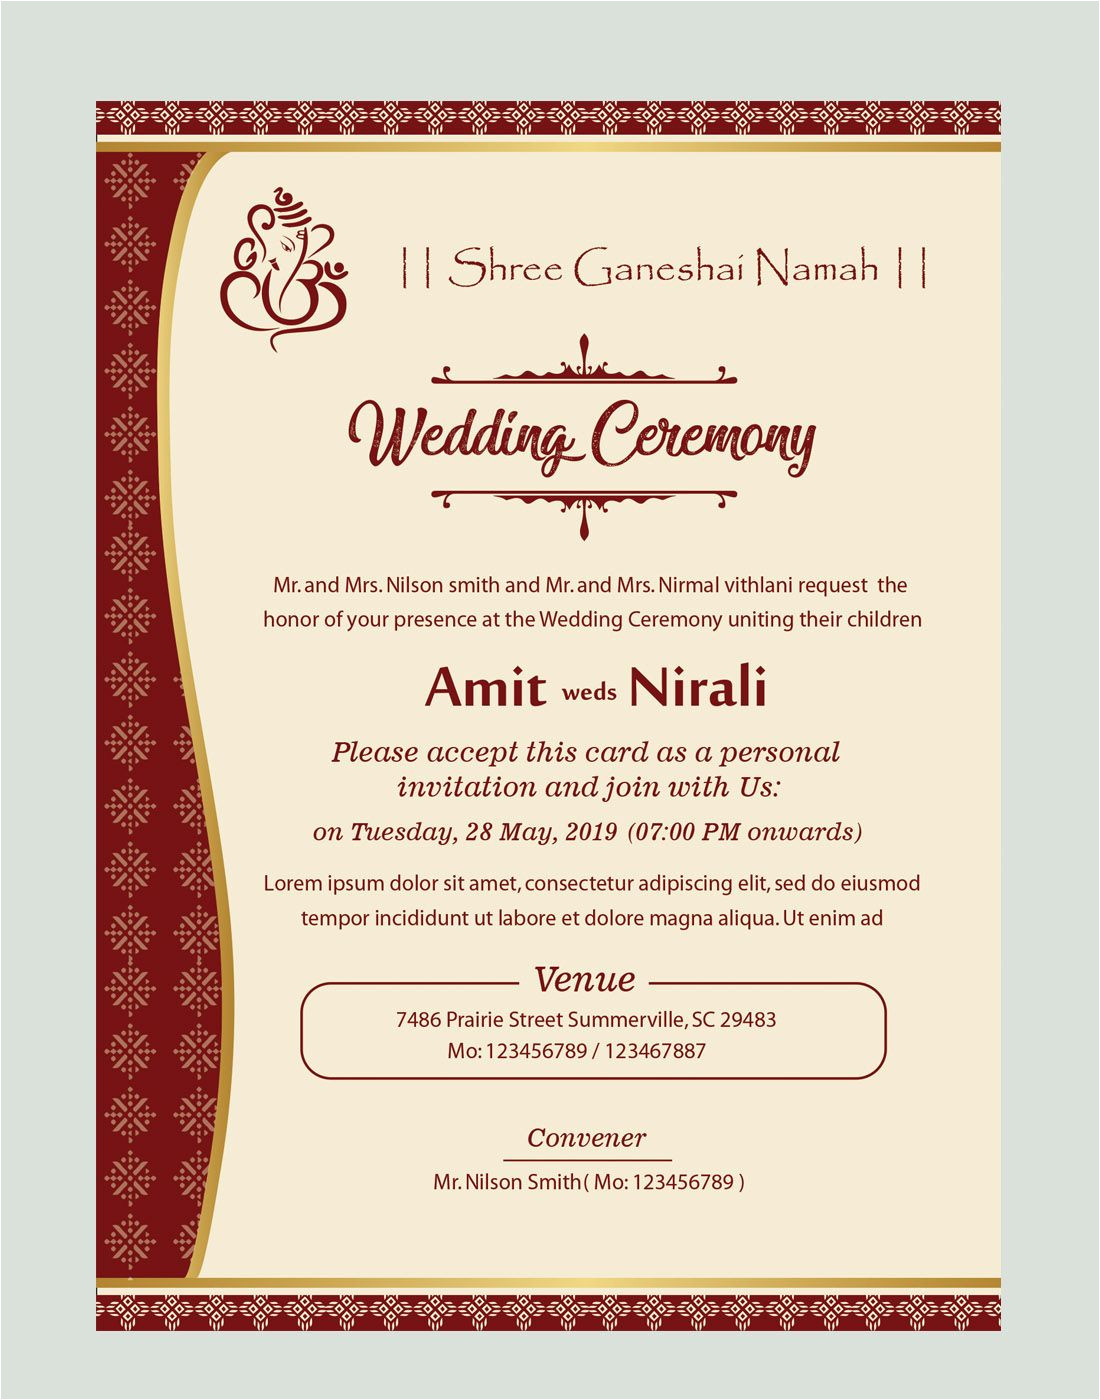 Marriage Card Sample In English Free Kankotri Card Template with Images Printable